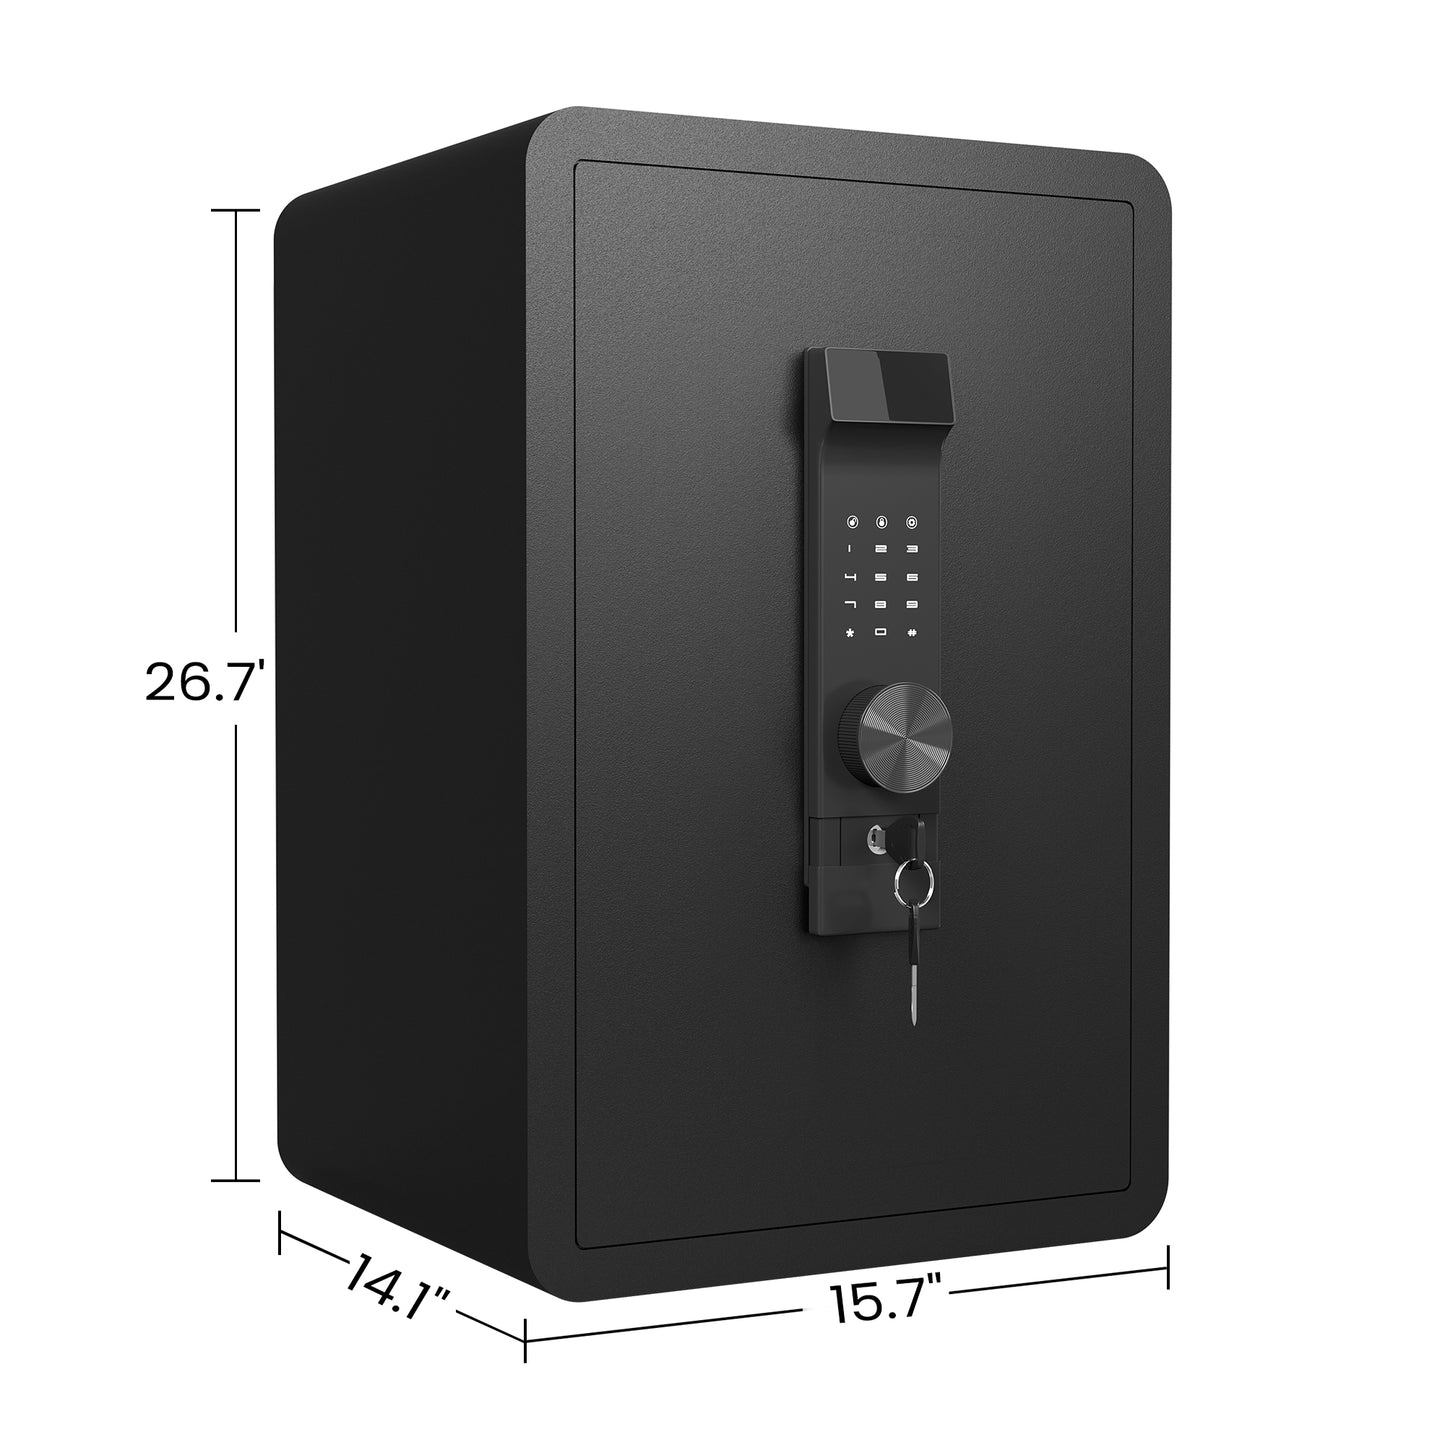 KU-68,High Security Super Large-sized Safe Box, 3.5 Cub Feet Safe with Electronic Password Lock,Safe with Private Inner Cabinet for Home,Office and Hotel